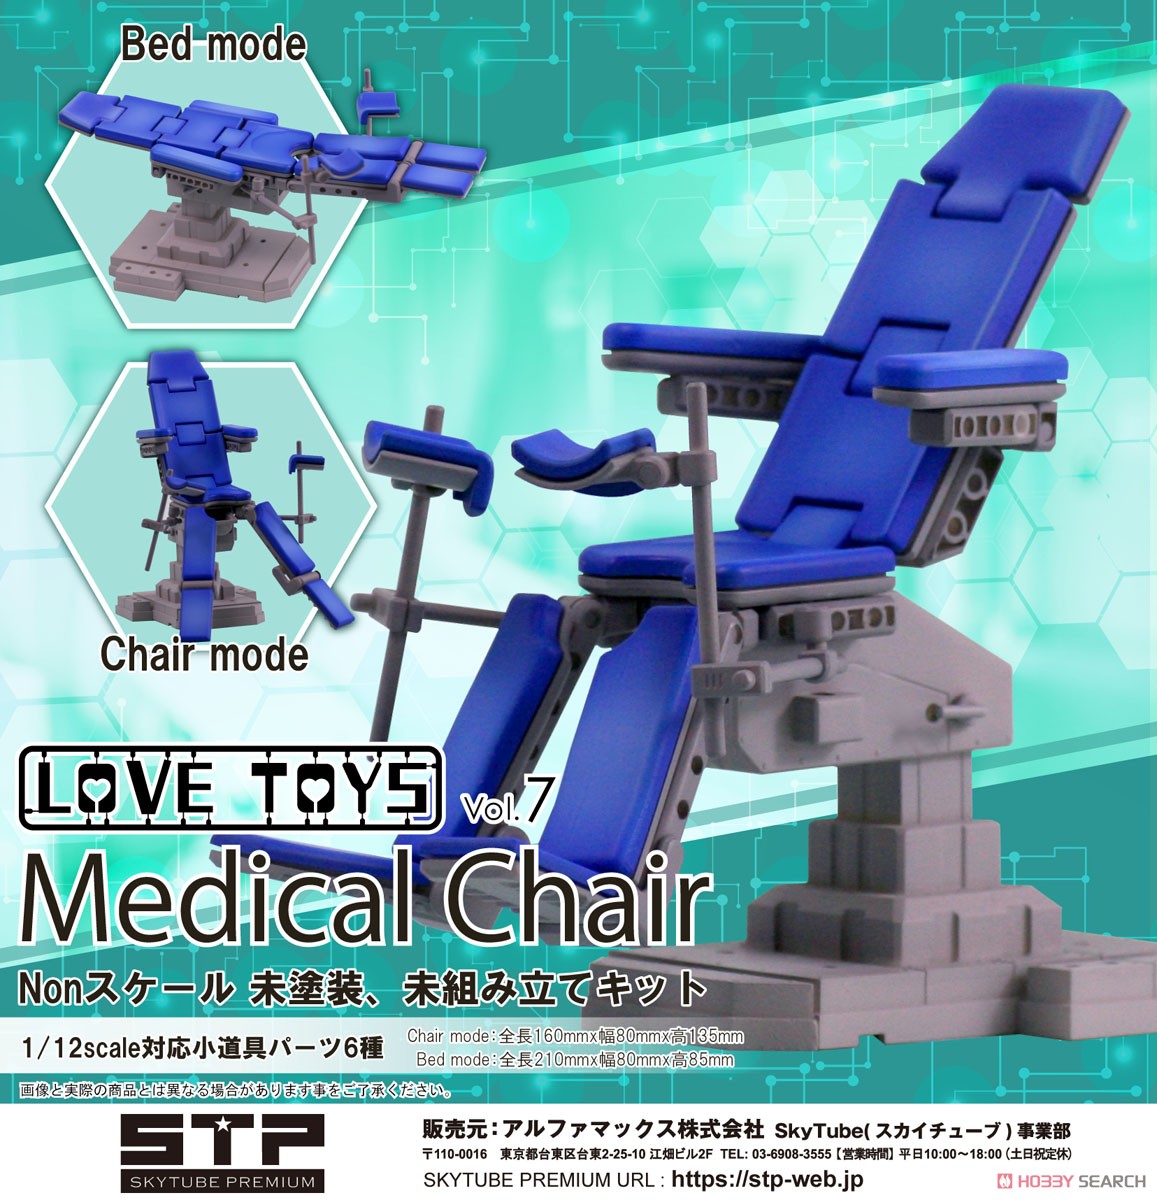 LOVE TOYS Vol.7 Medical Chair (組立キット) 商品画像6